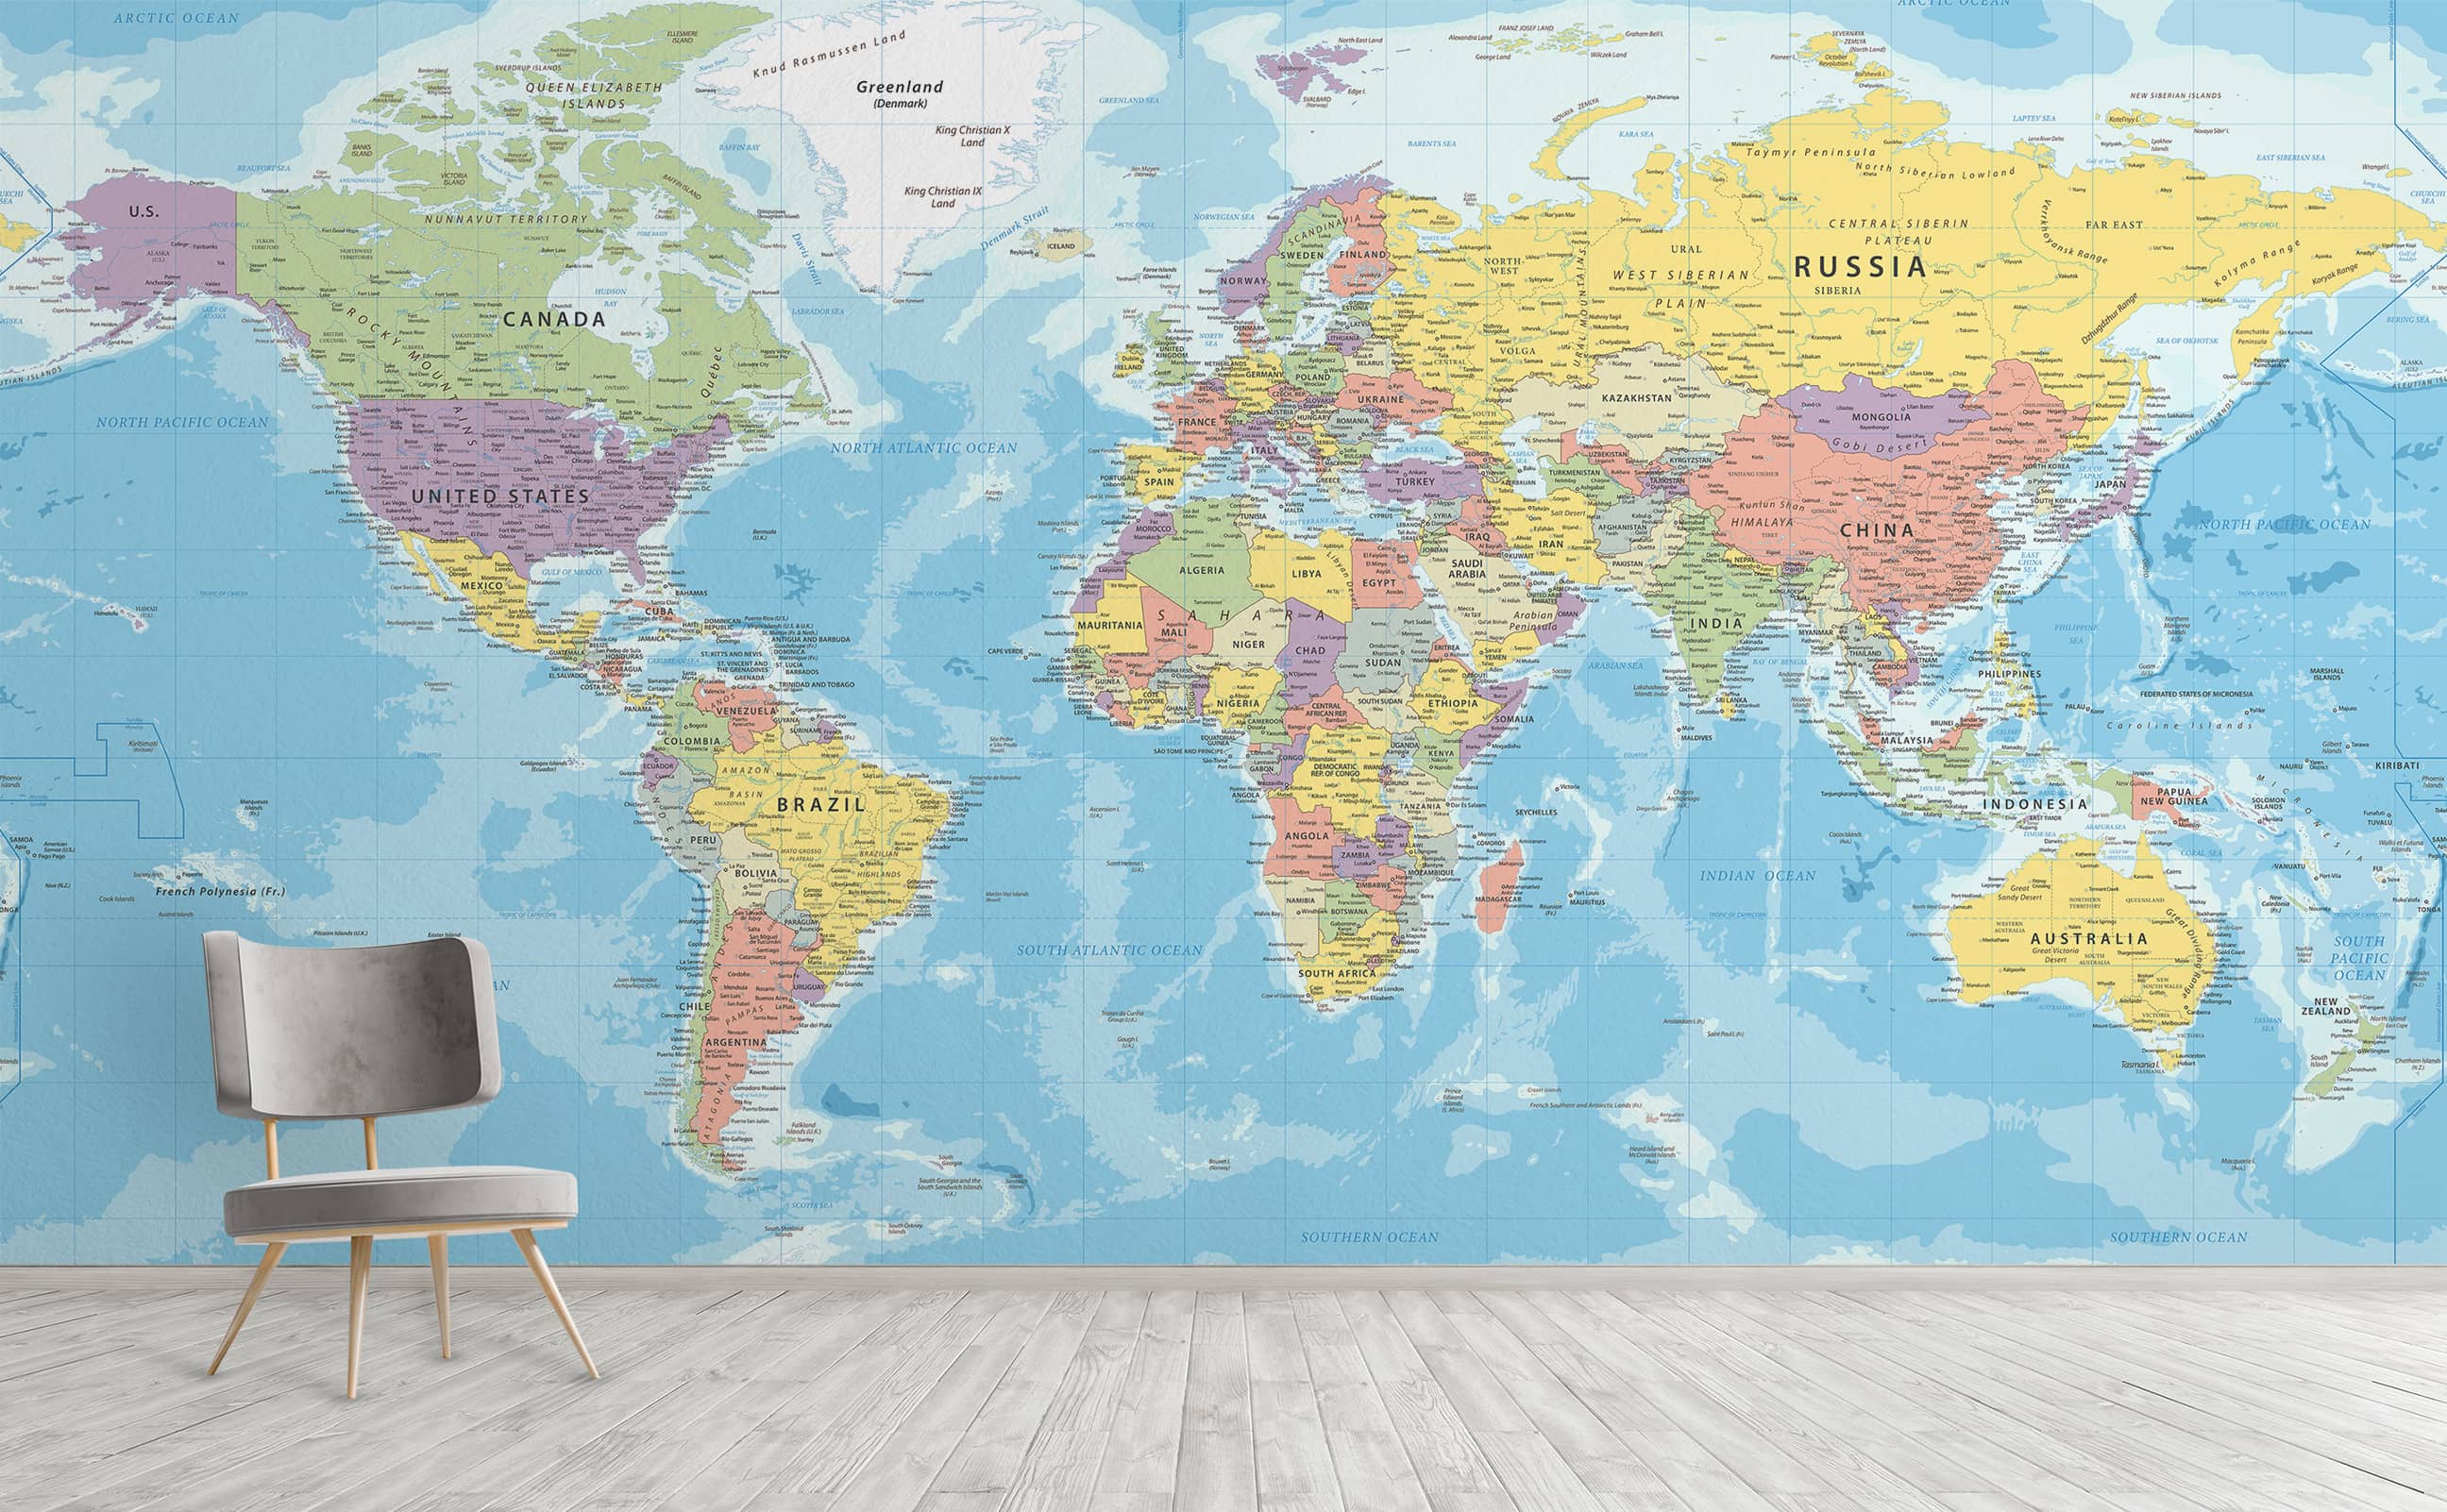 Classic colorful political world map wall mural | Social Studies